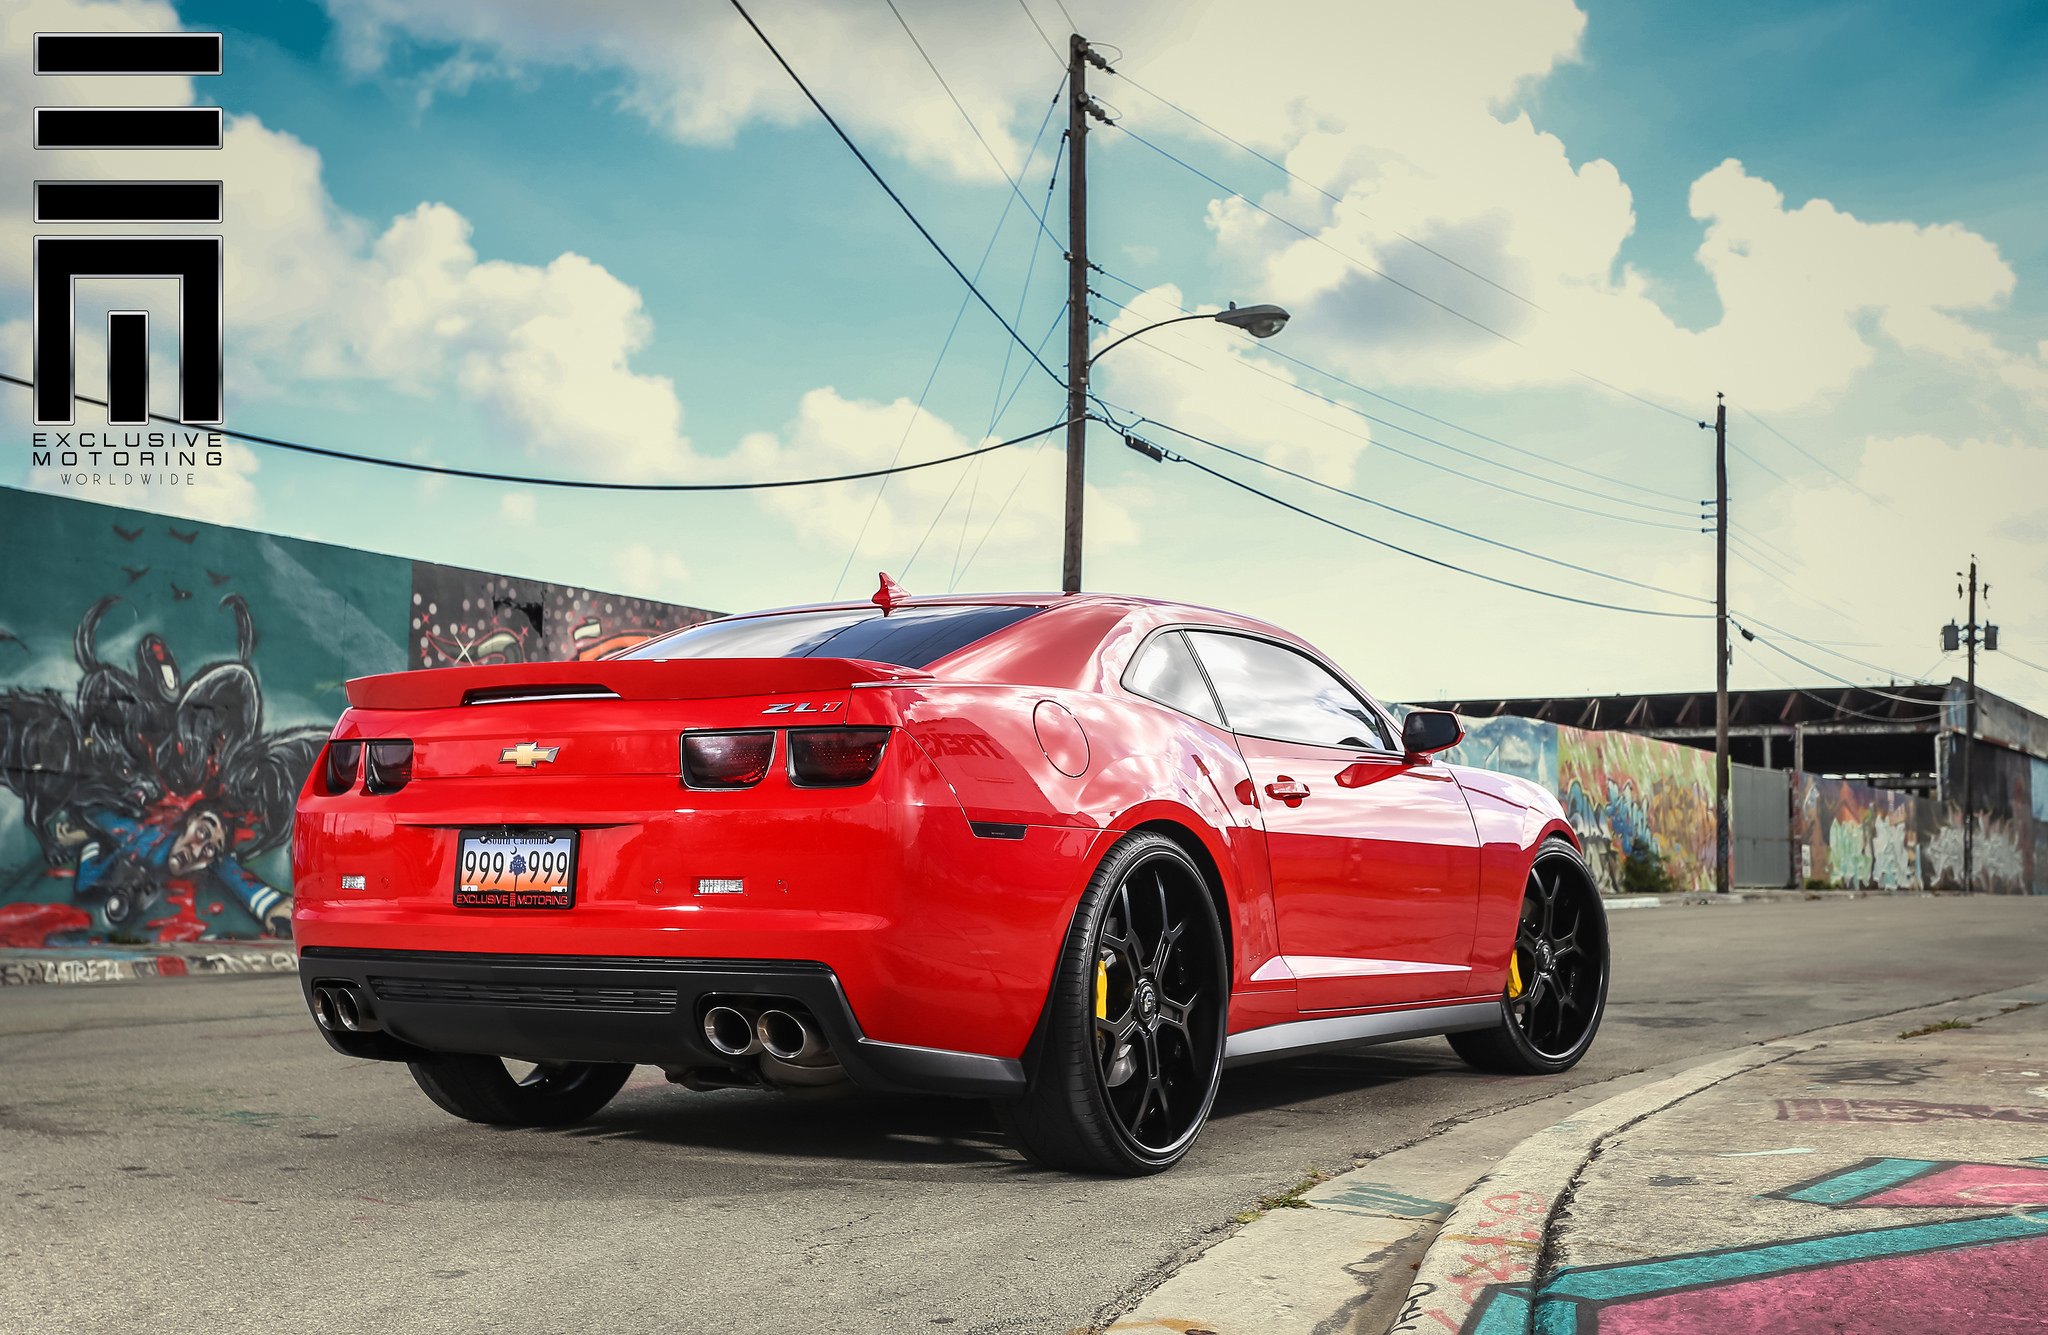 Sporty look of Red Chevy Camaro ZL1 on Black Forgiato Wheels  - Photo by Exclusive Motoring